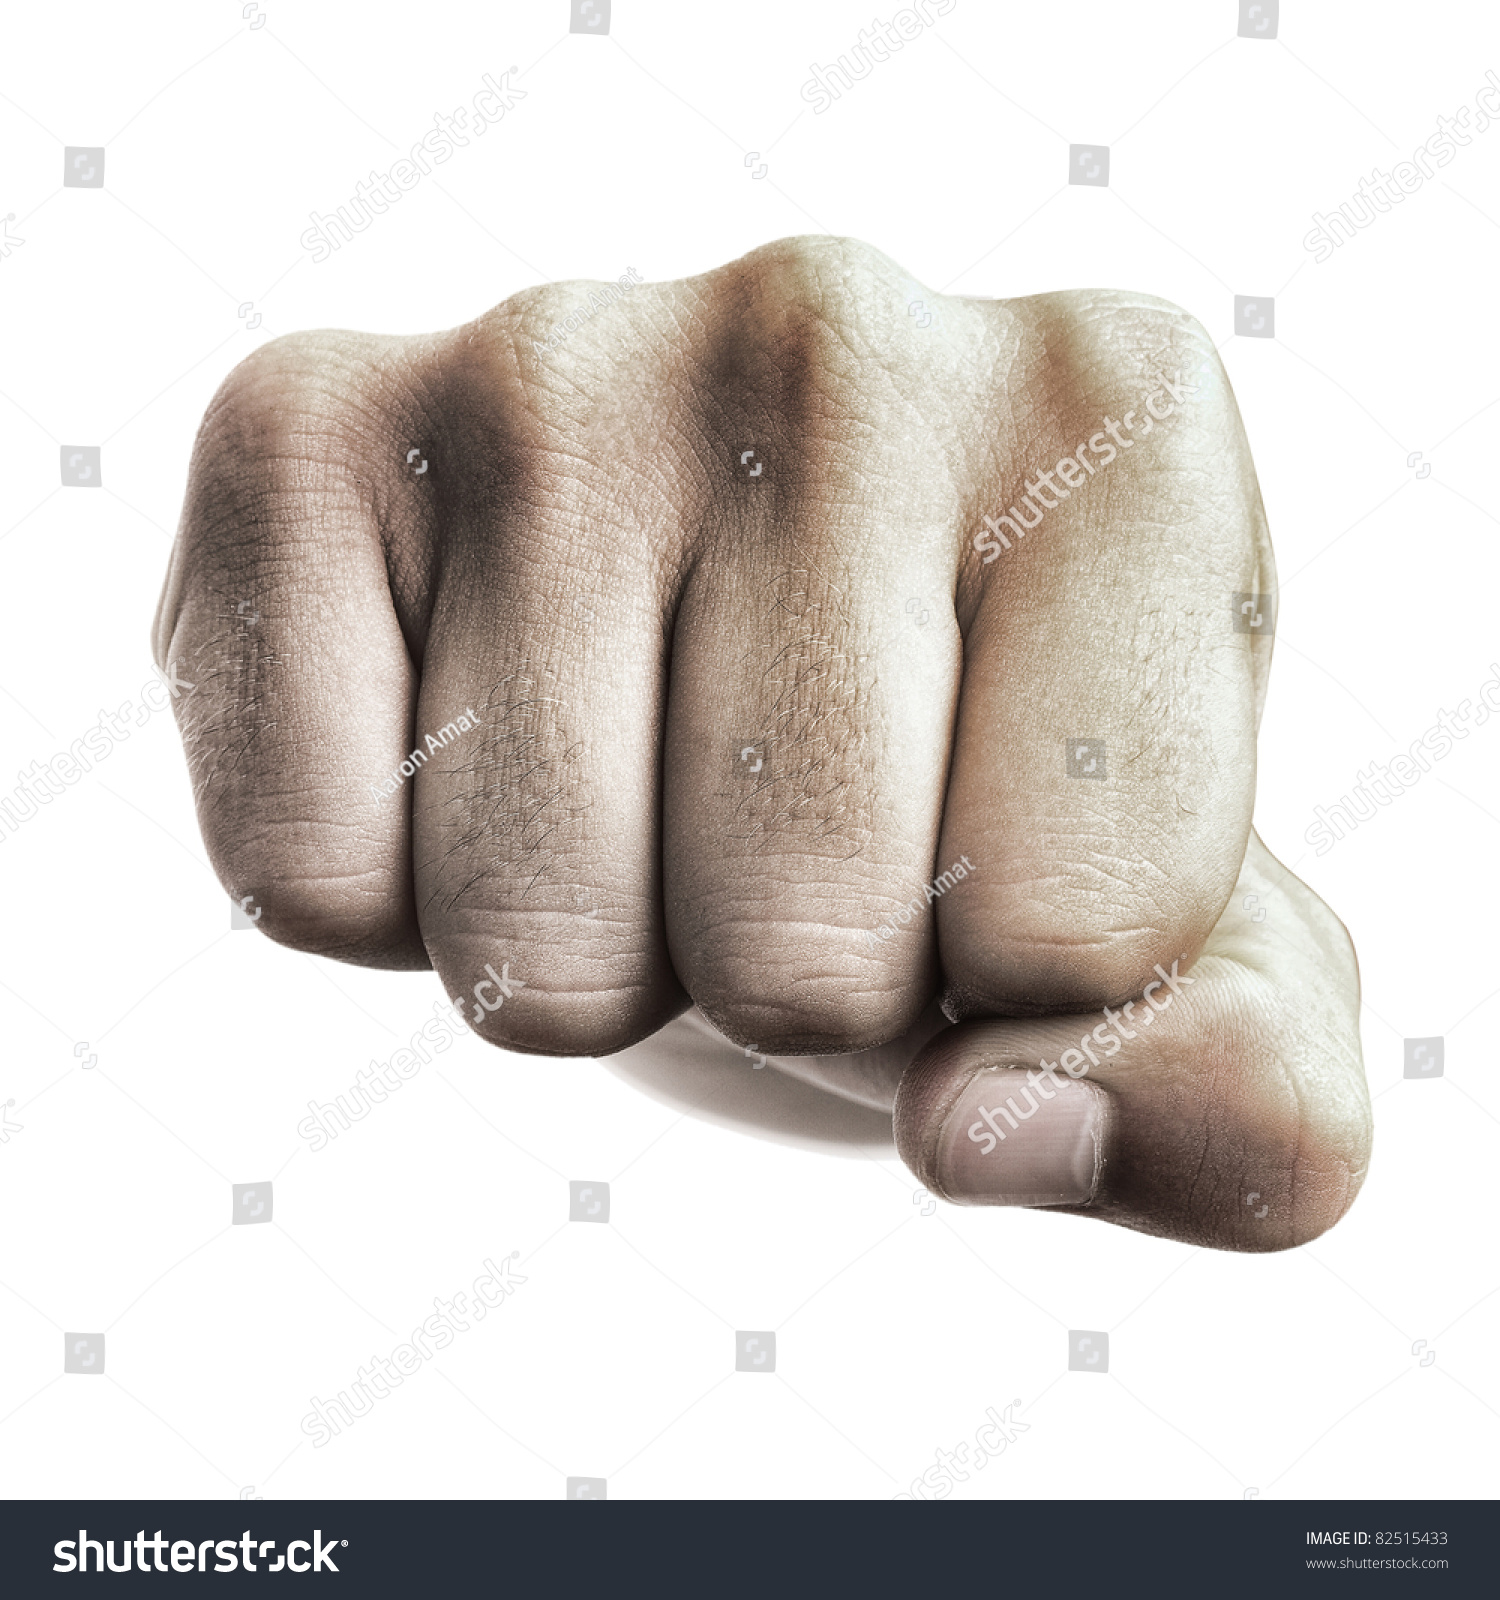 Punch Fist Isolated On A White Background Stock Photo ...